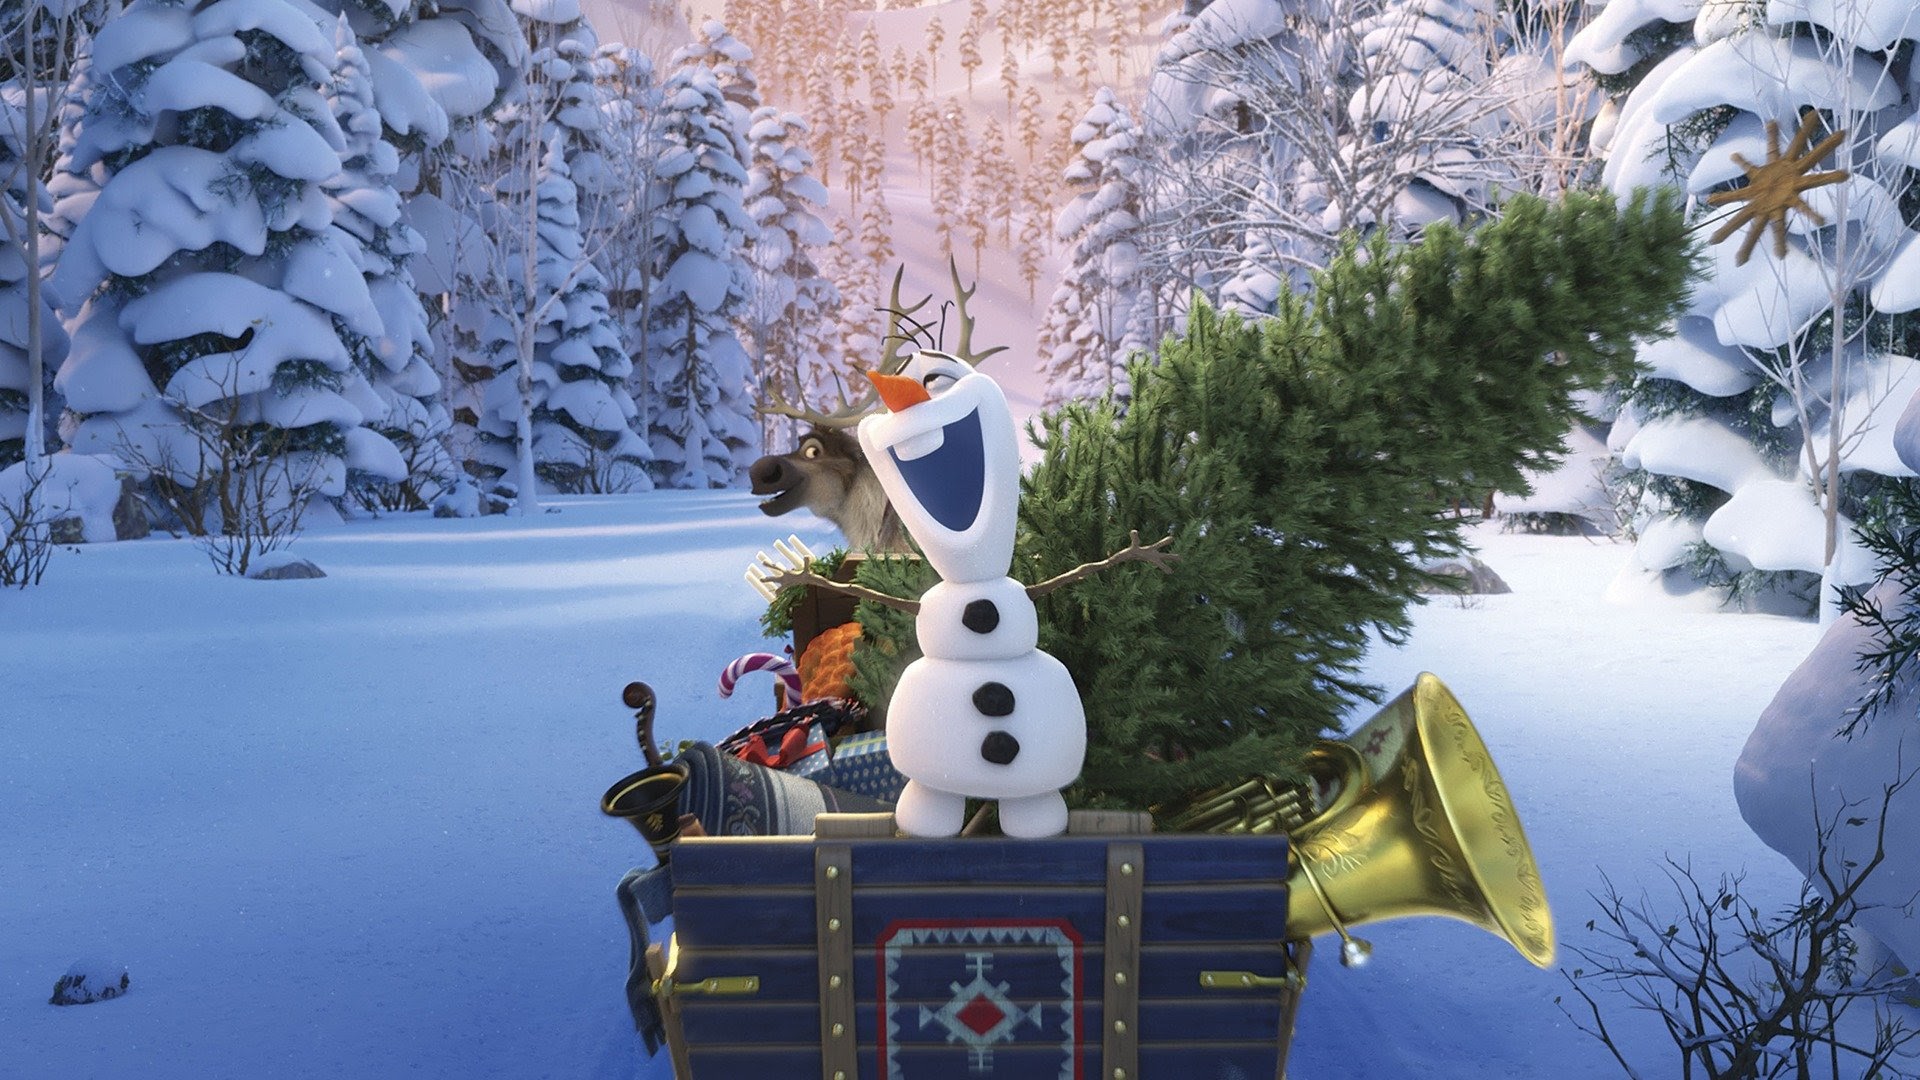 Frozen - Movies on Google Play